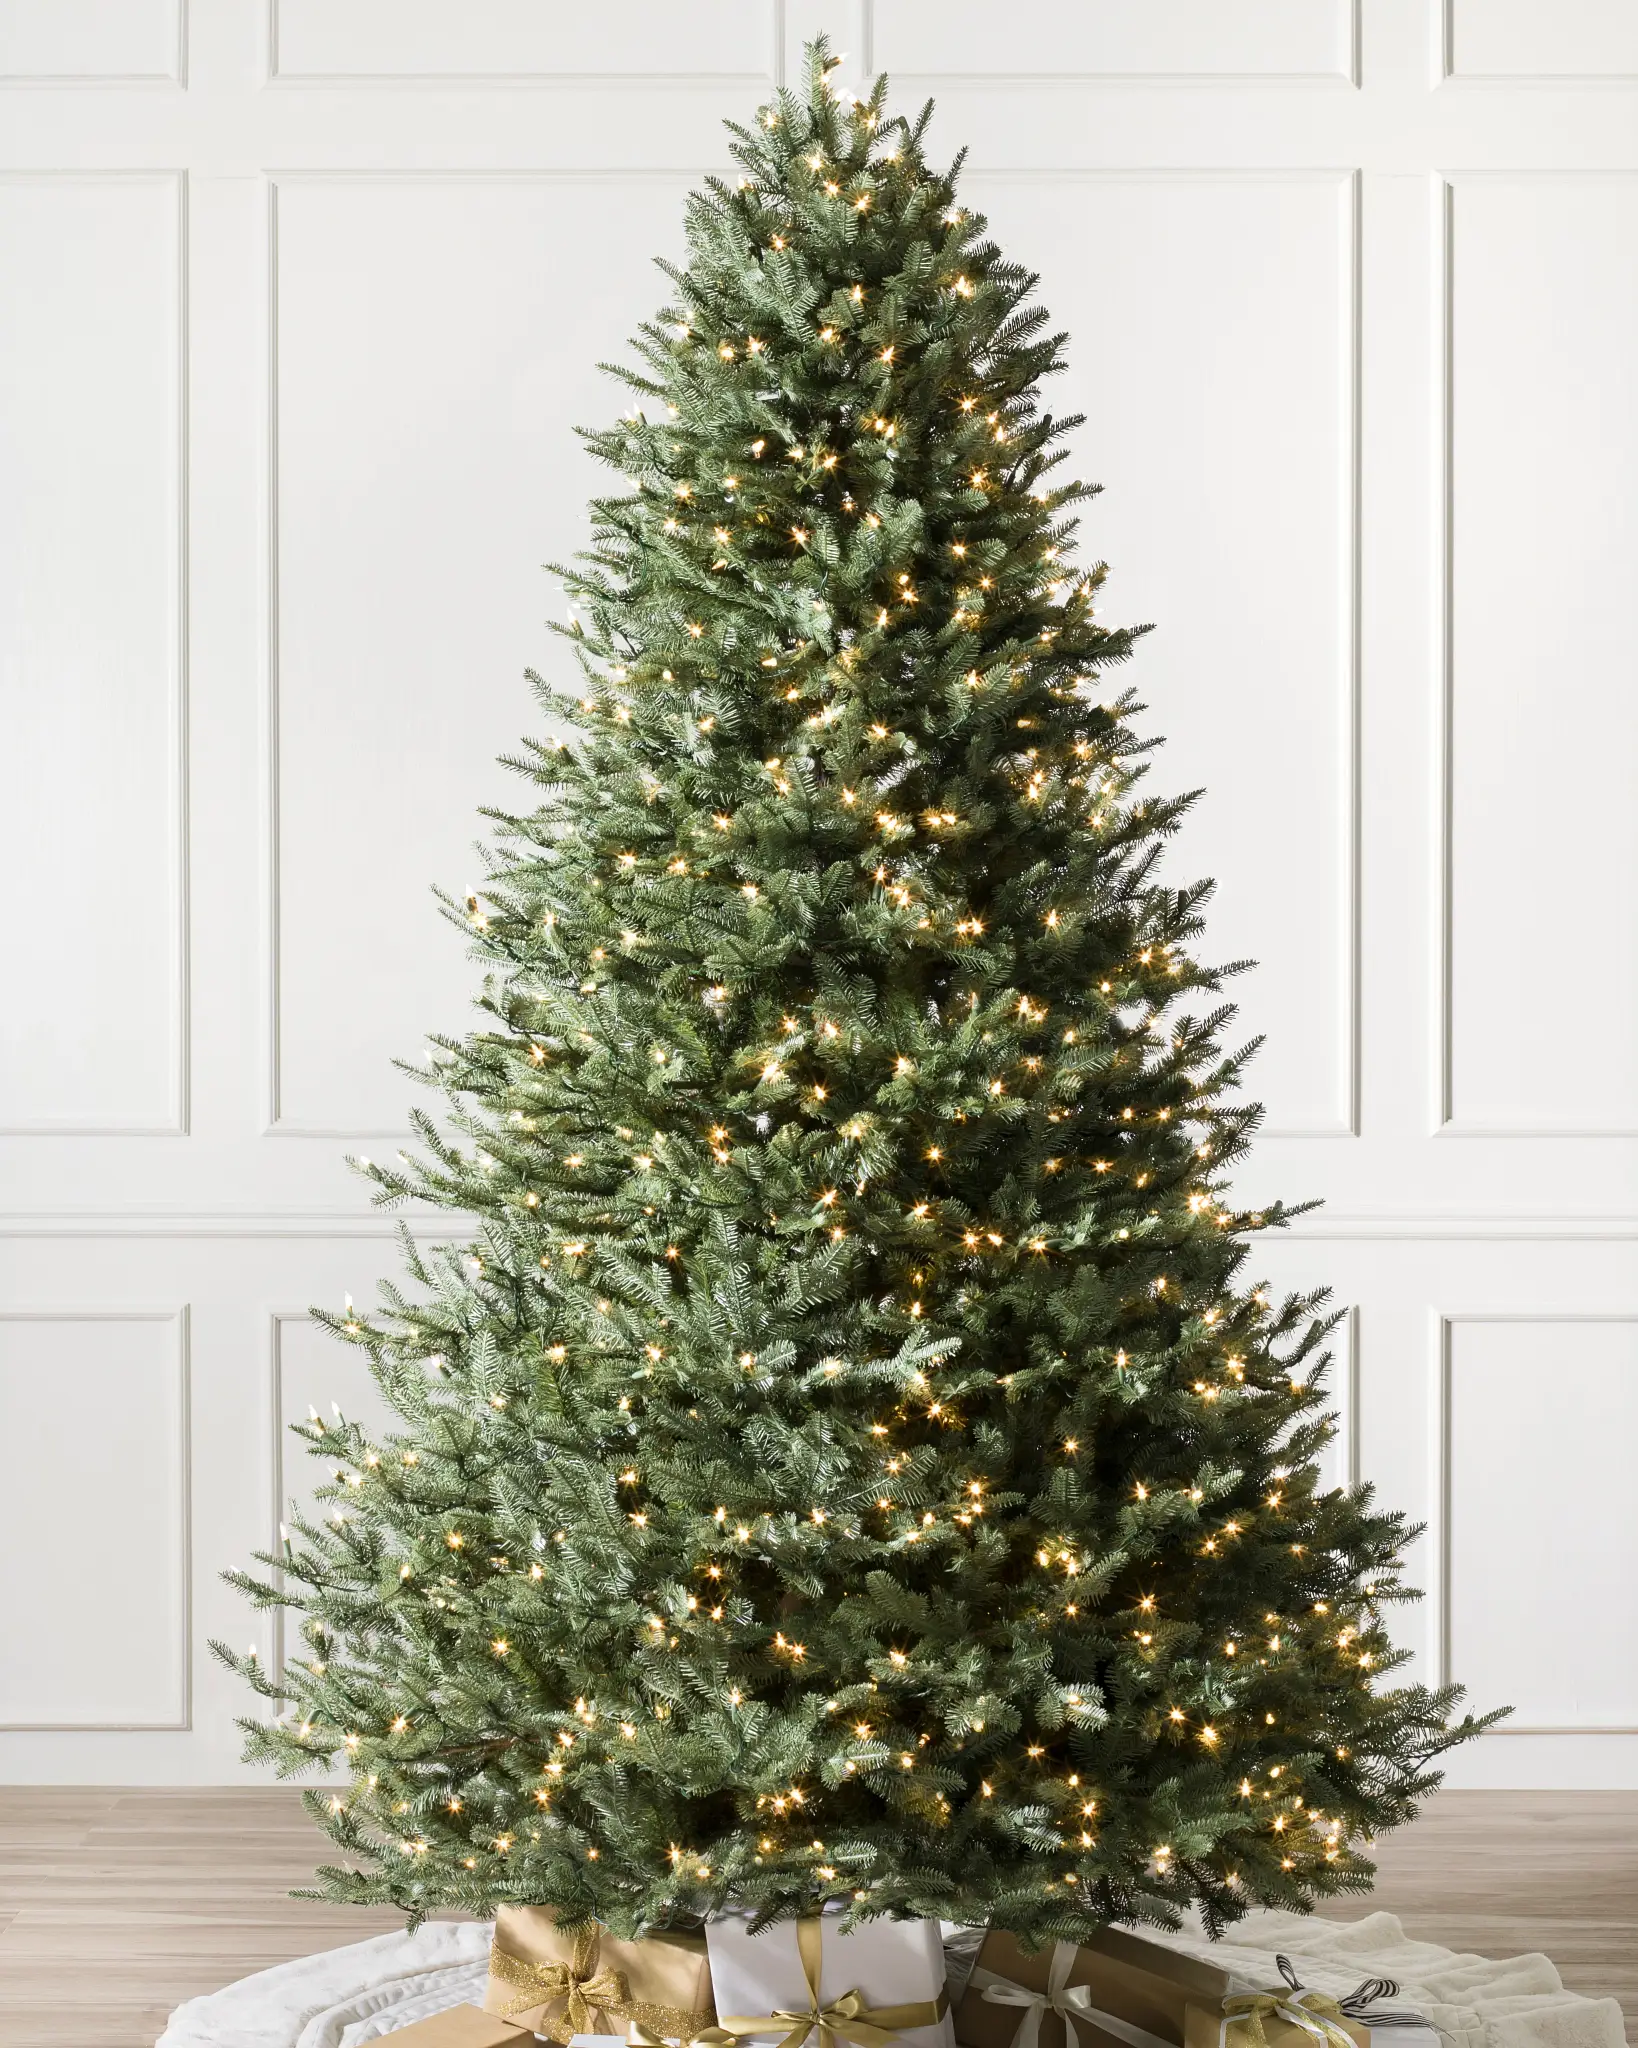 10 35 Lights 12' Strands of Clear Christmas/Holiday Tree Lights Indoor 